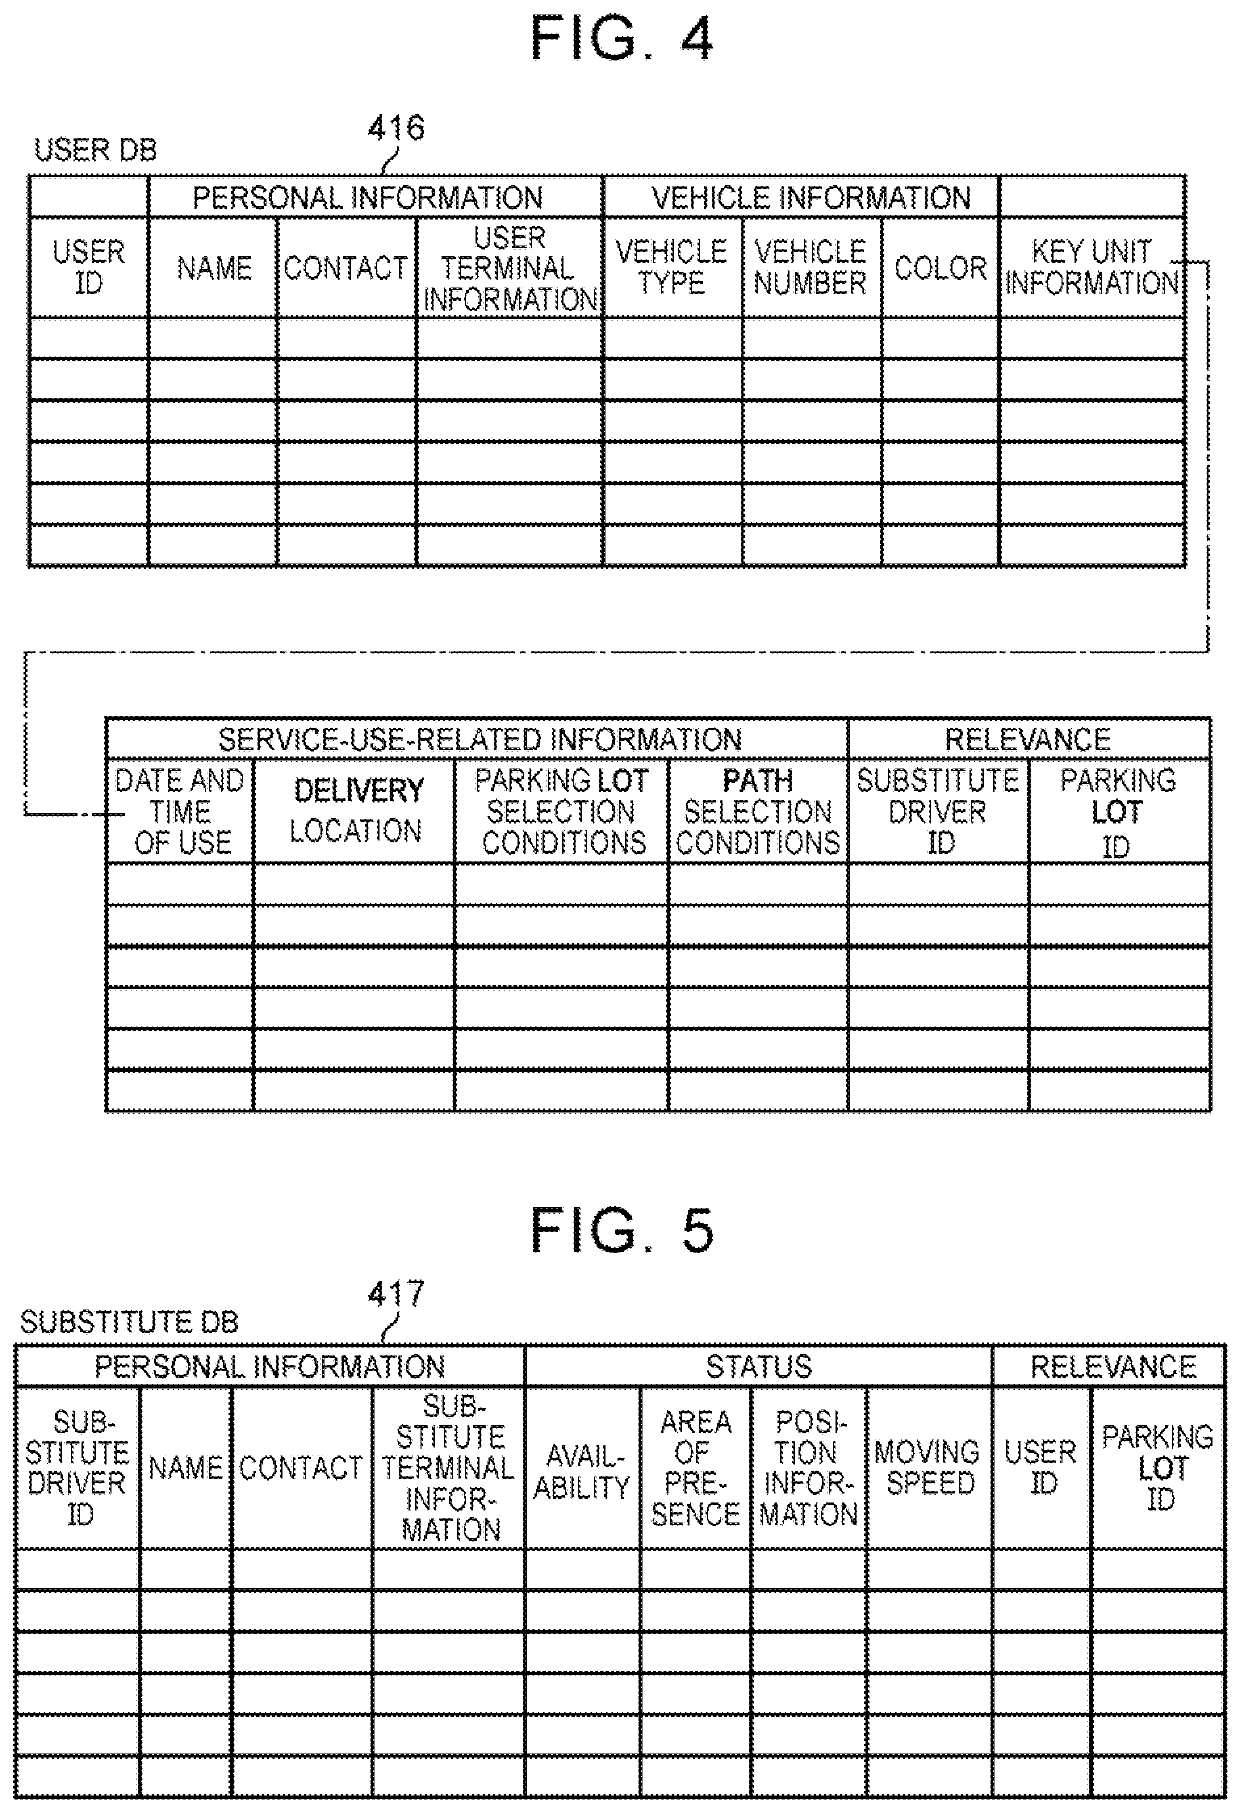 Management system of substitute parking service, method of assisting use of substitute parking service, and non-transitory computer-readable storage medium storing management programs